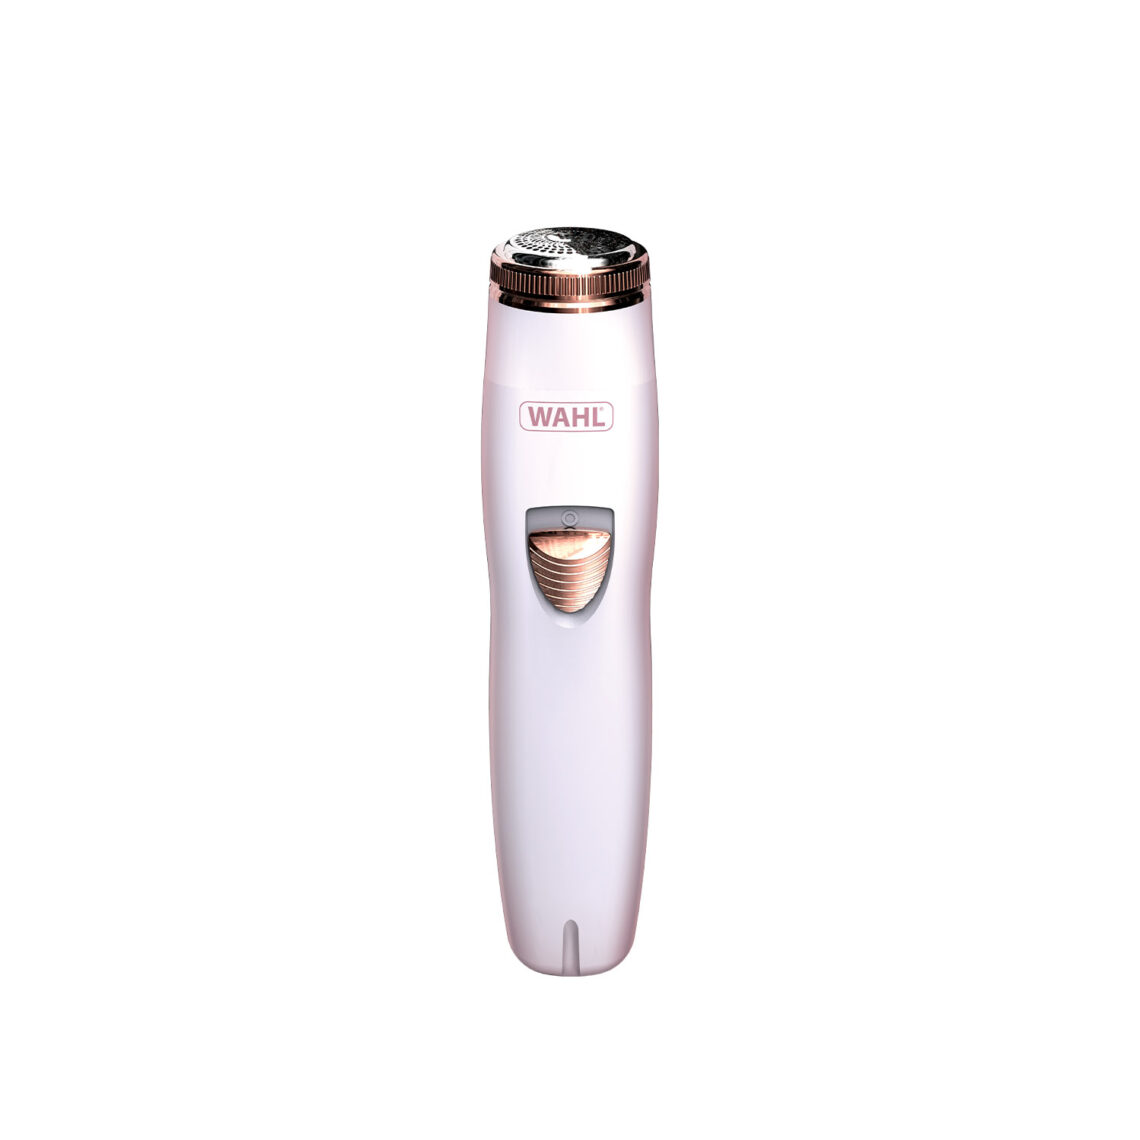 facial hair remover trimmer for ladies